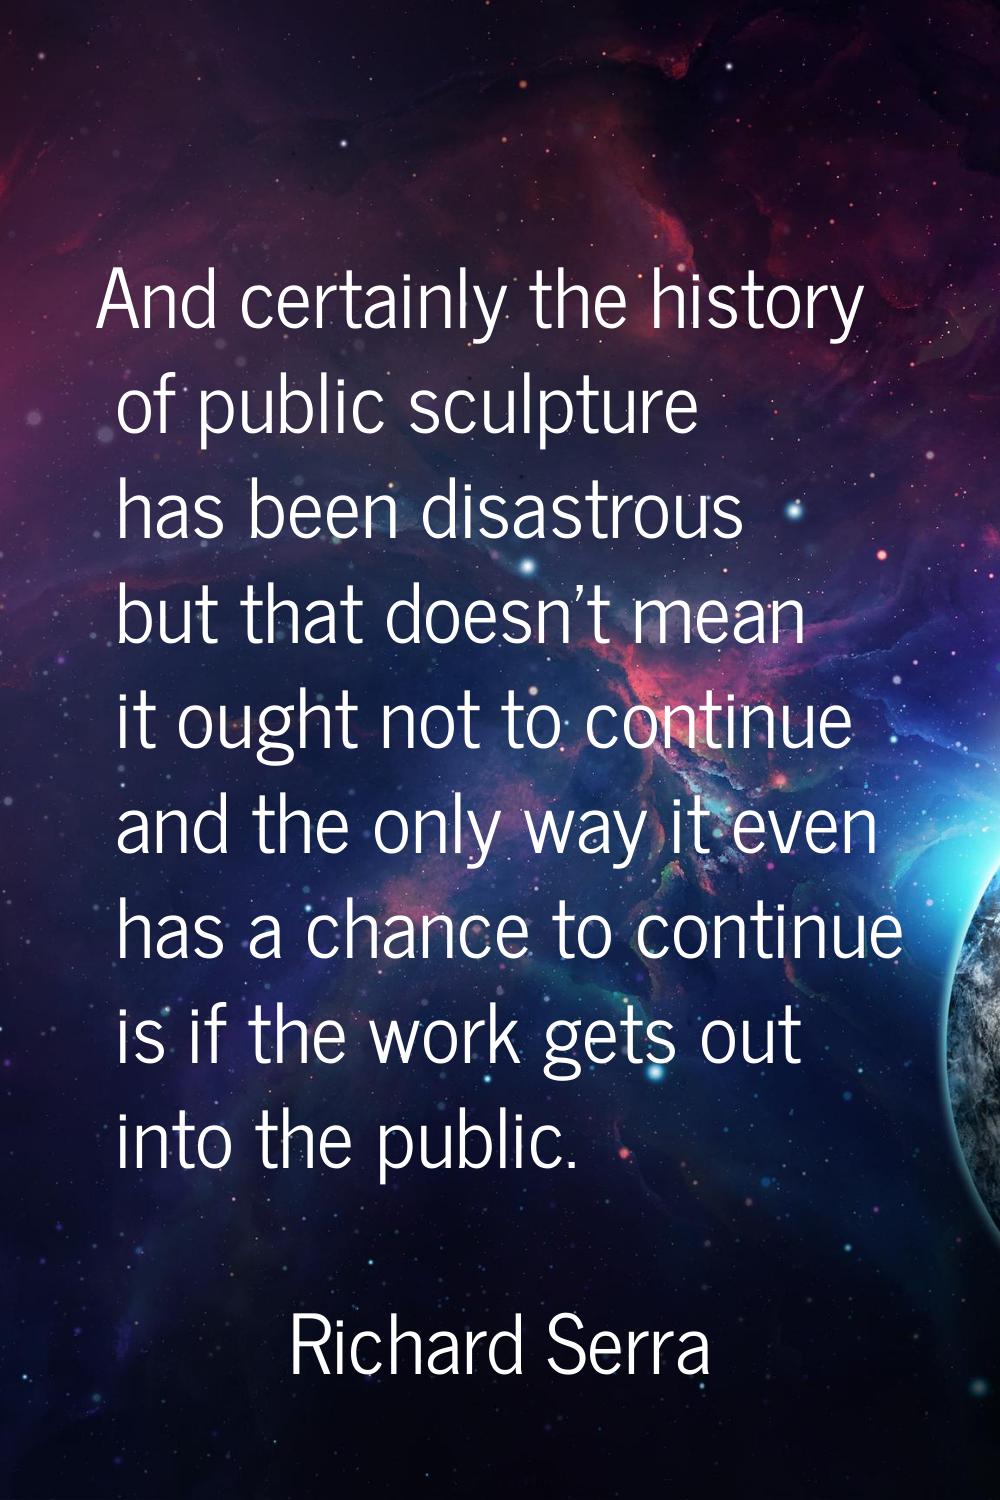 And certainly the history of public sculpture has been disastrous but that doesn't mean it ought no